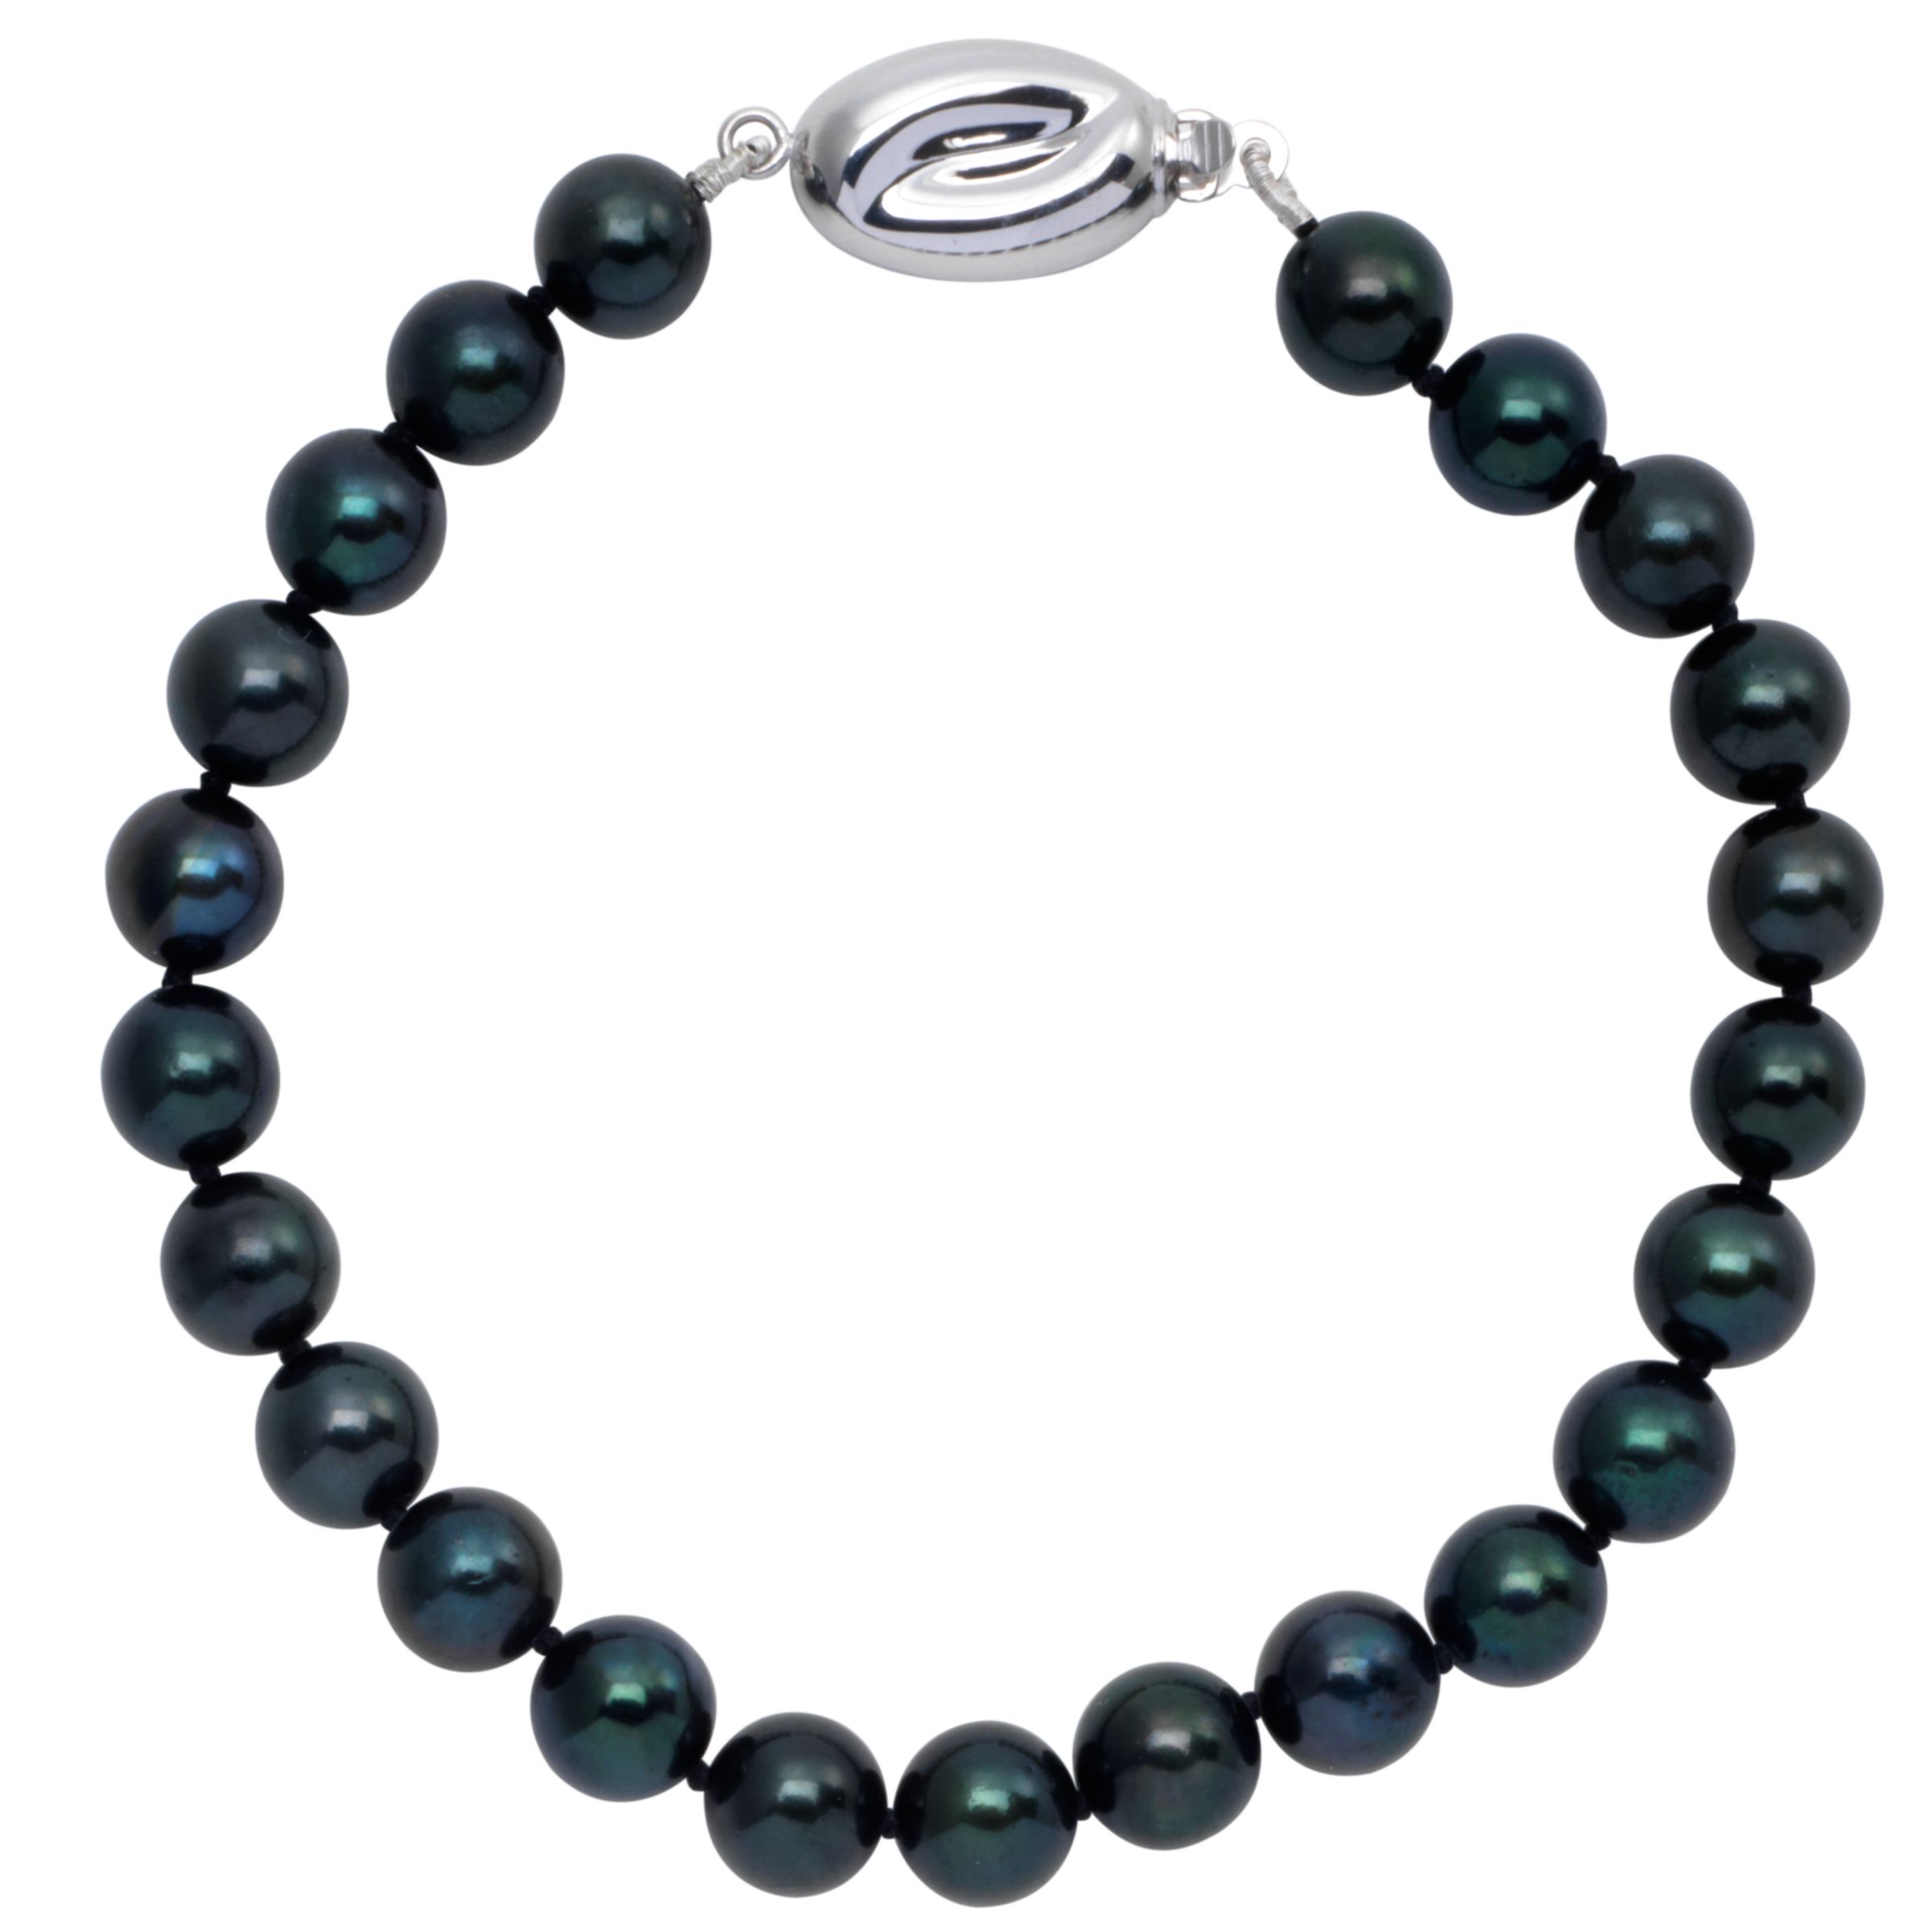 Cultured Black Pearl Knotted 7.5" Bracelet with White Gold Clasp at John Lewis